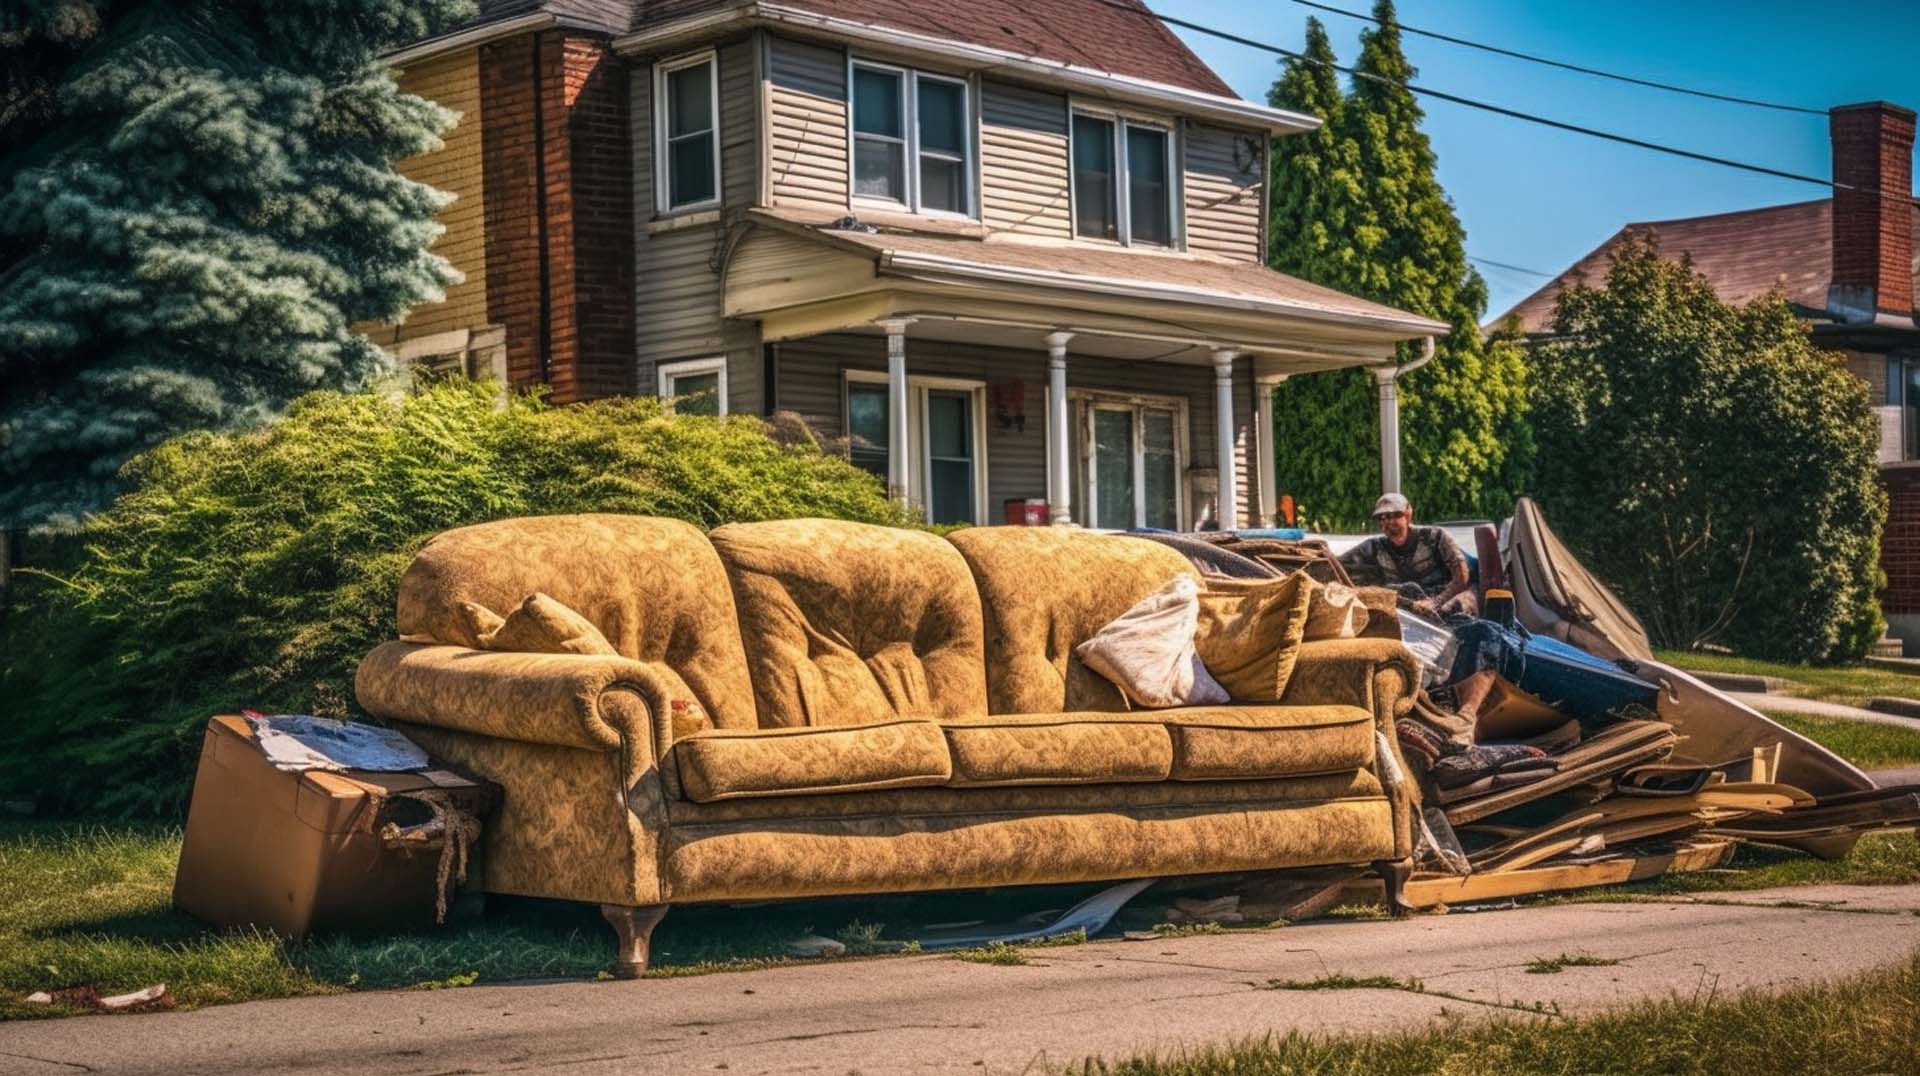 Residential Junk Removal Services in Kitsilano